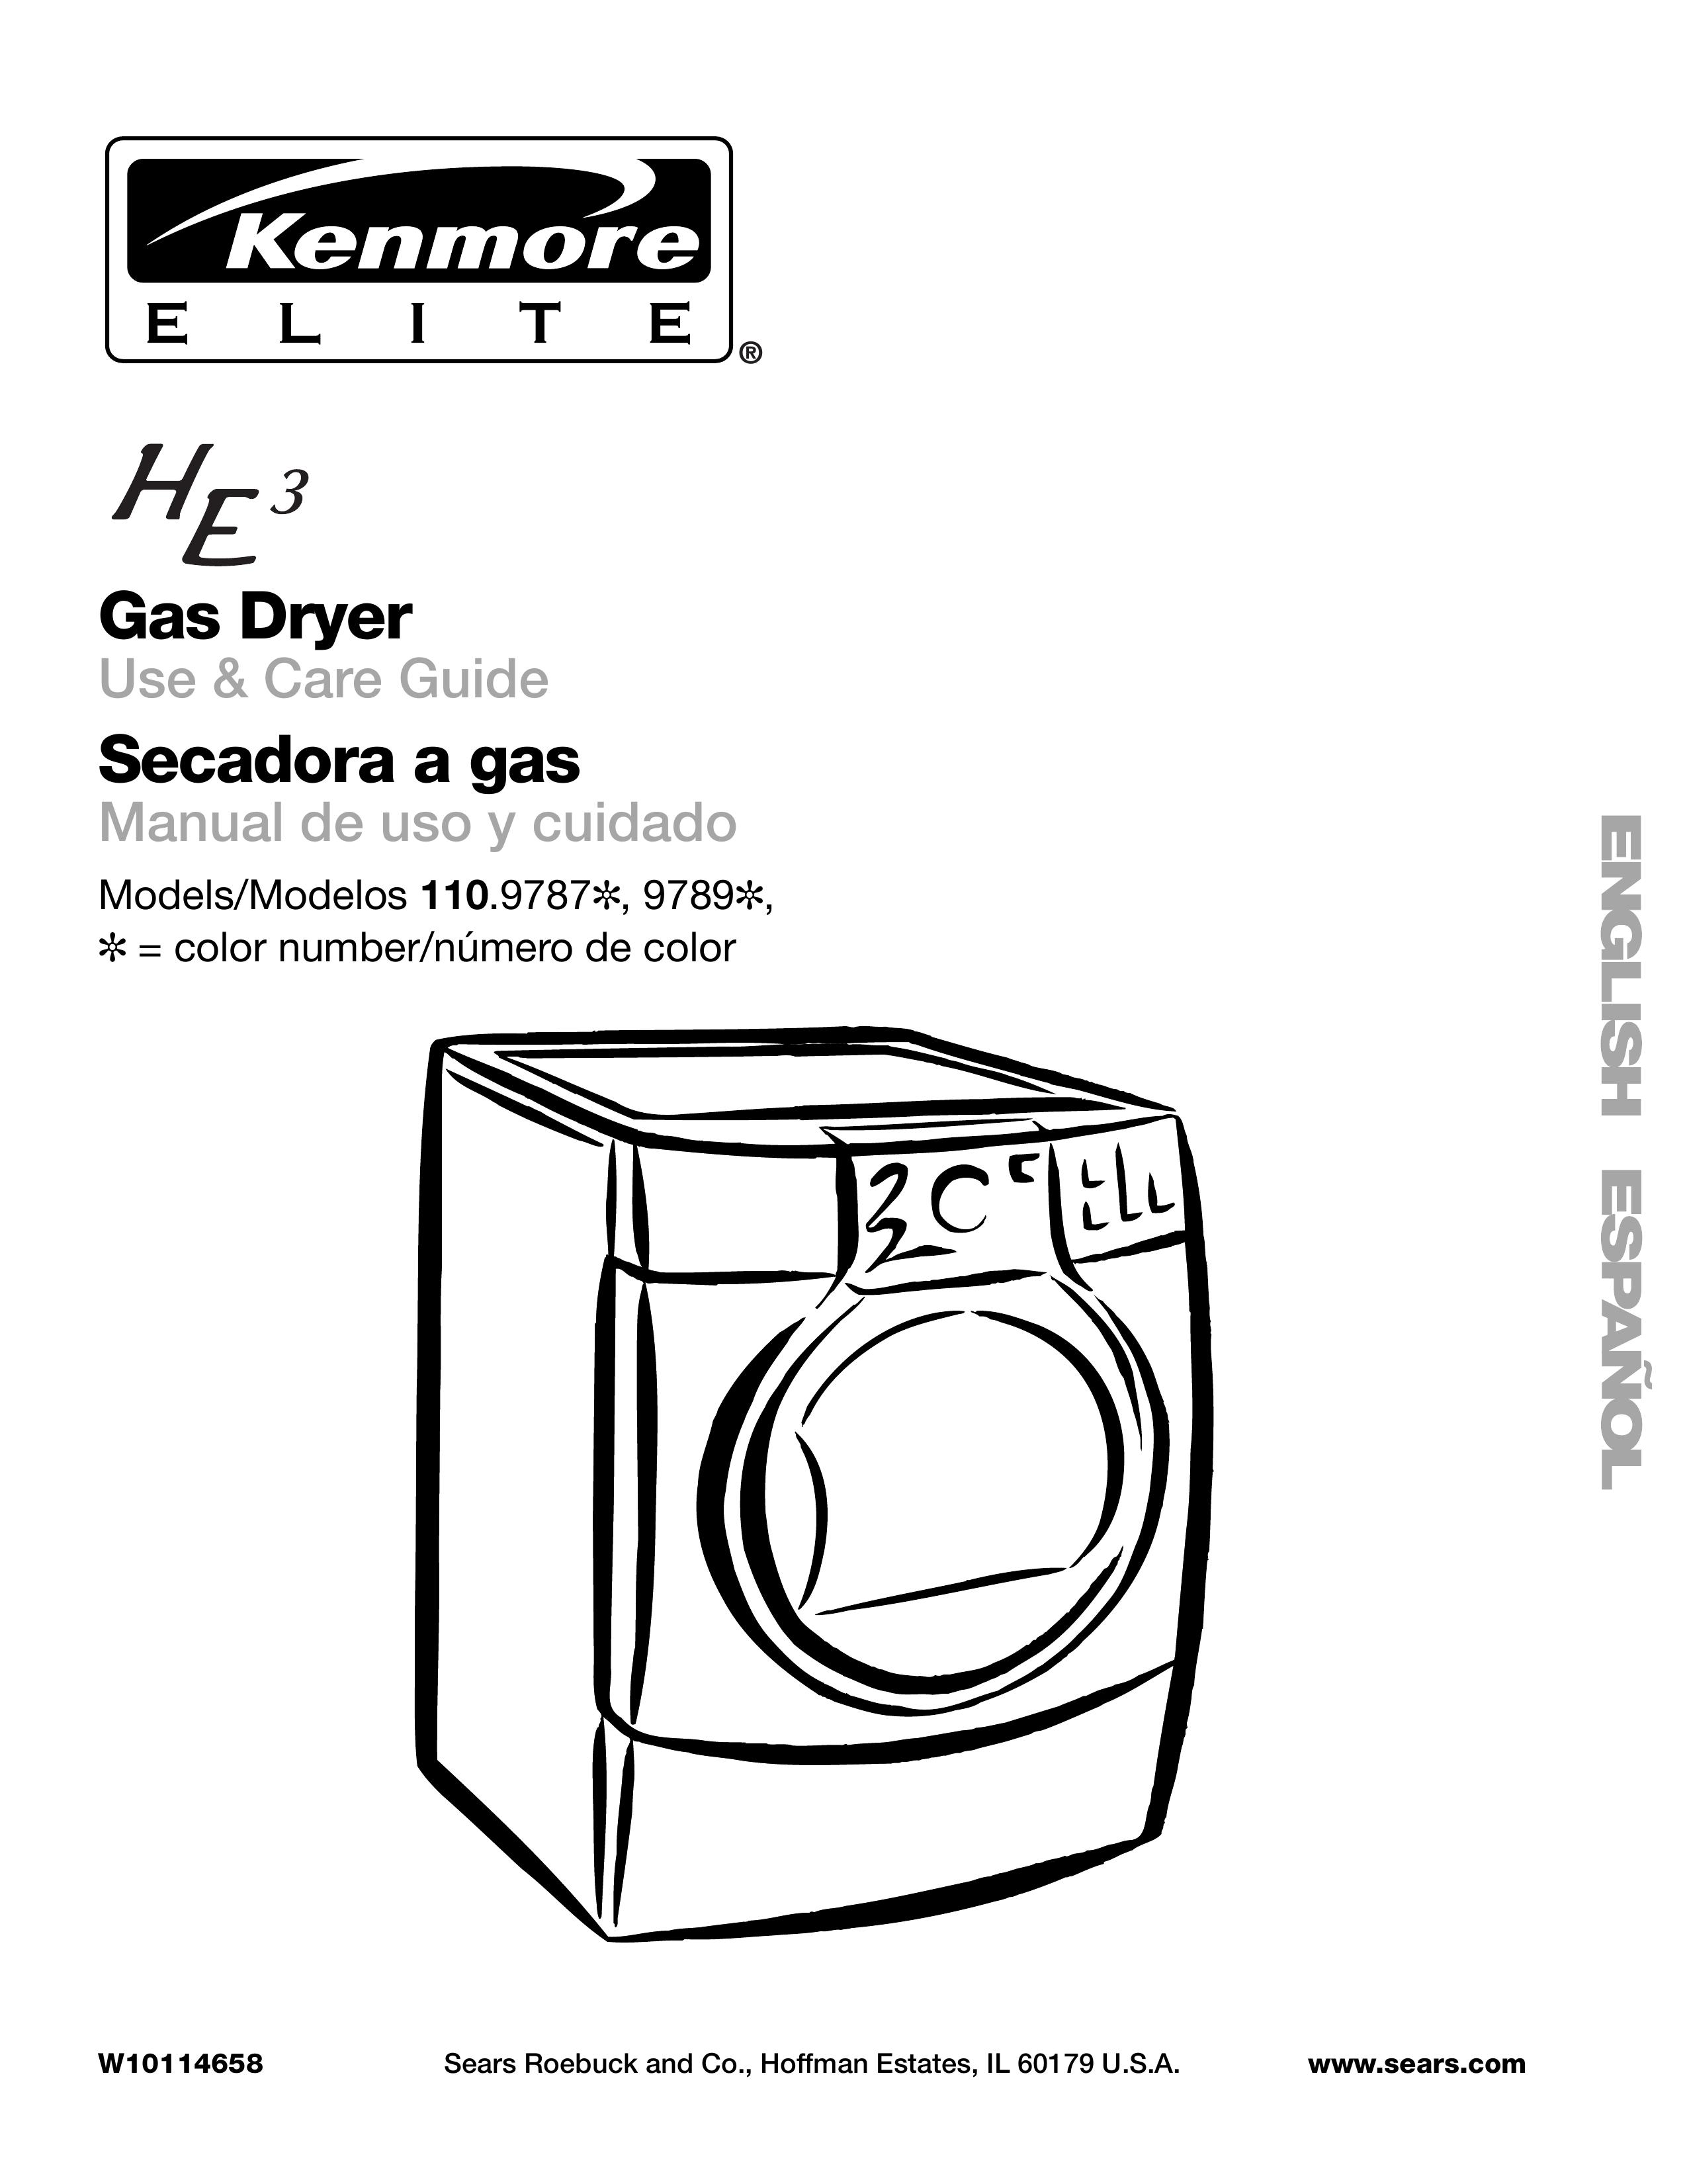 Kenmore 110.9787 Clothes Dryer User Manual